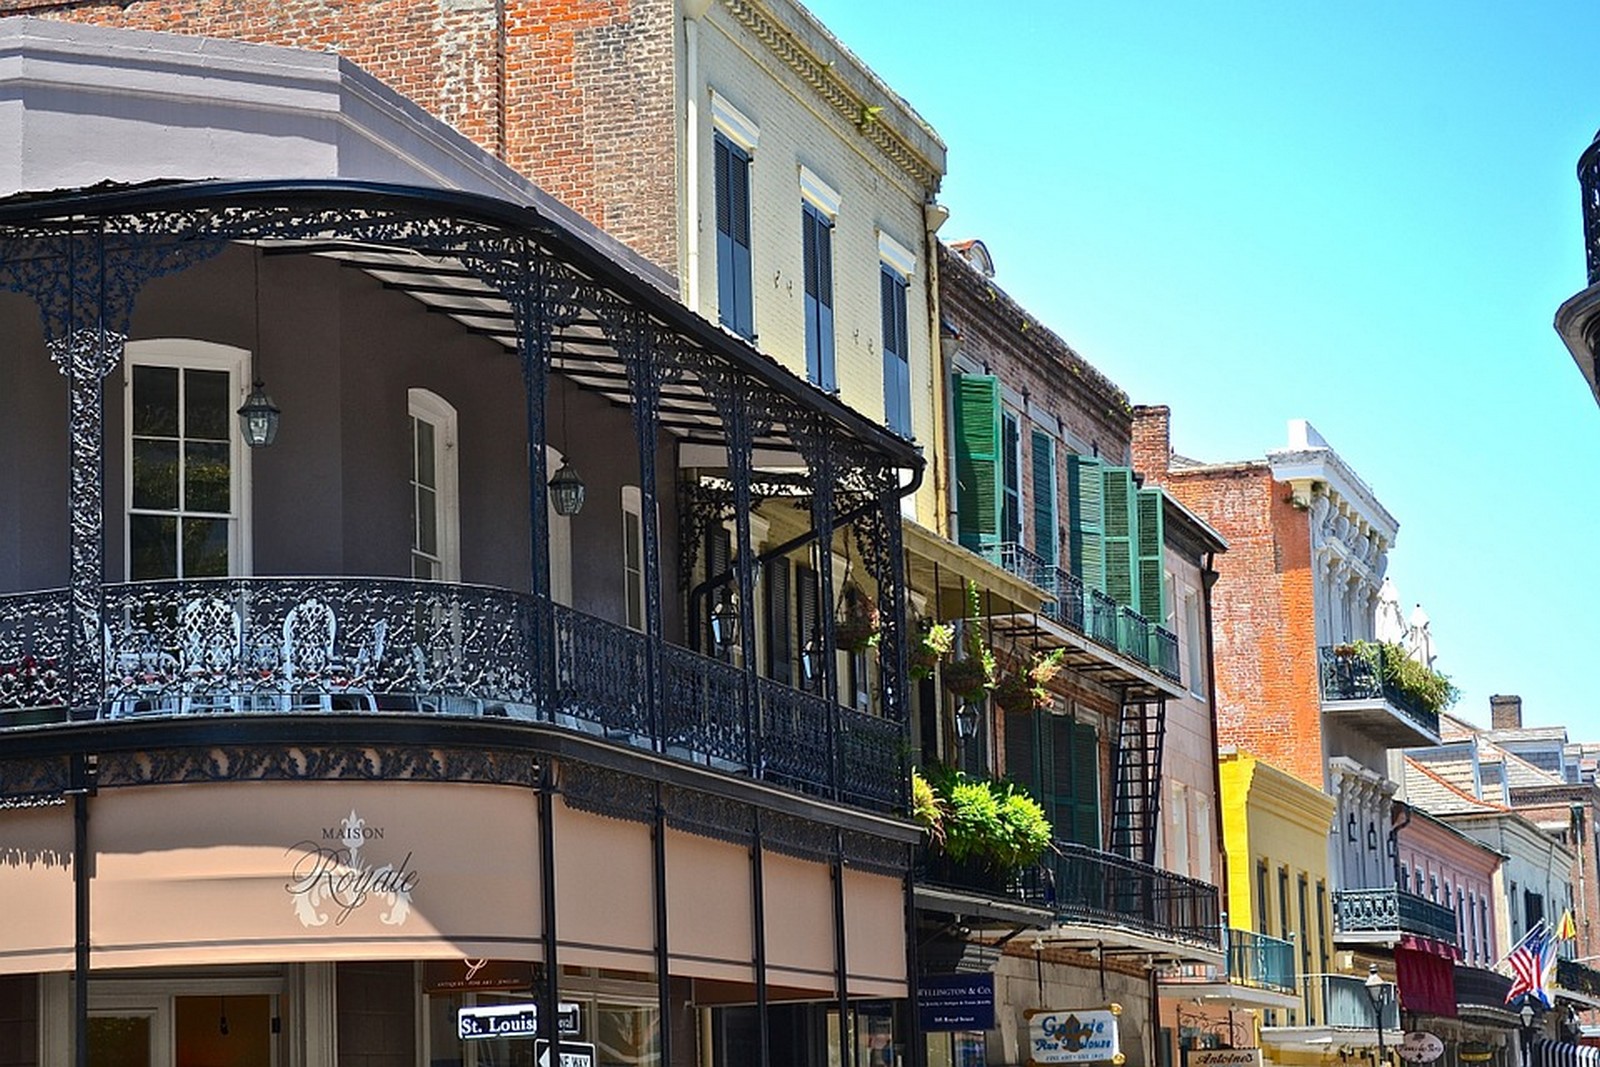 Take a family trip to New Orleans using Membership Rewards points